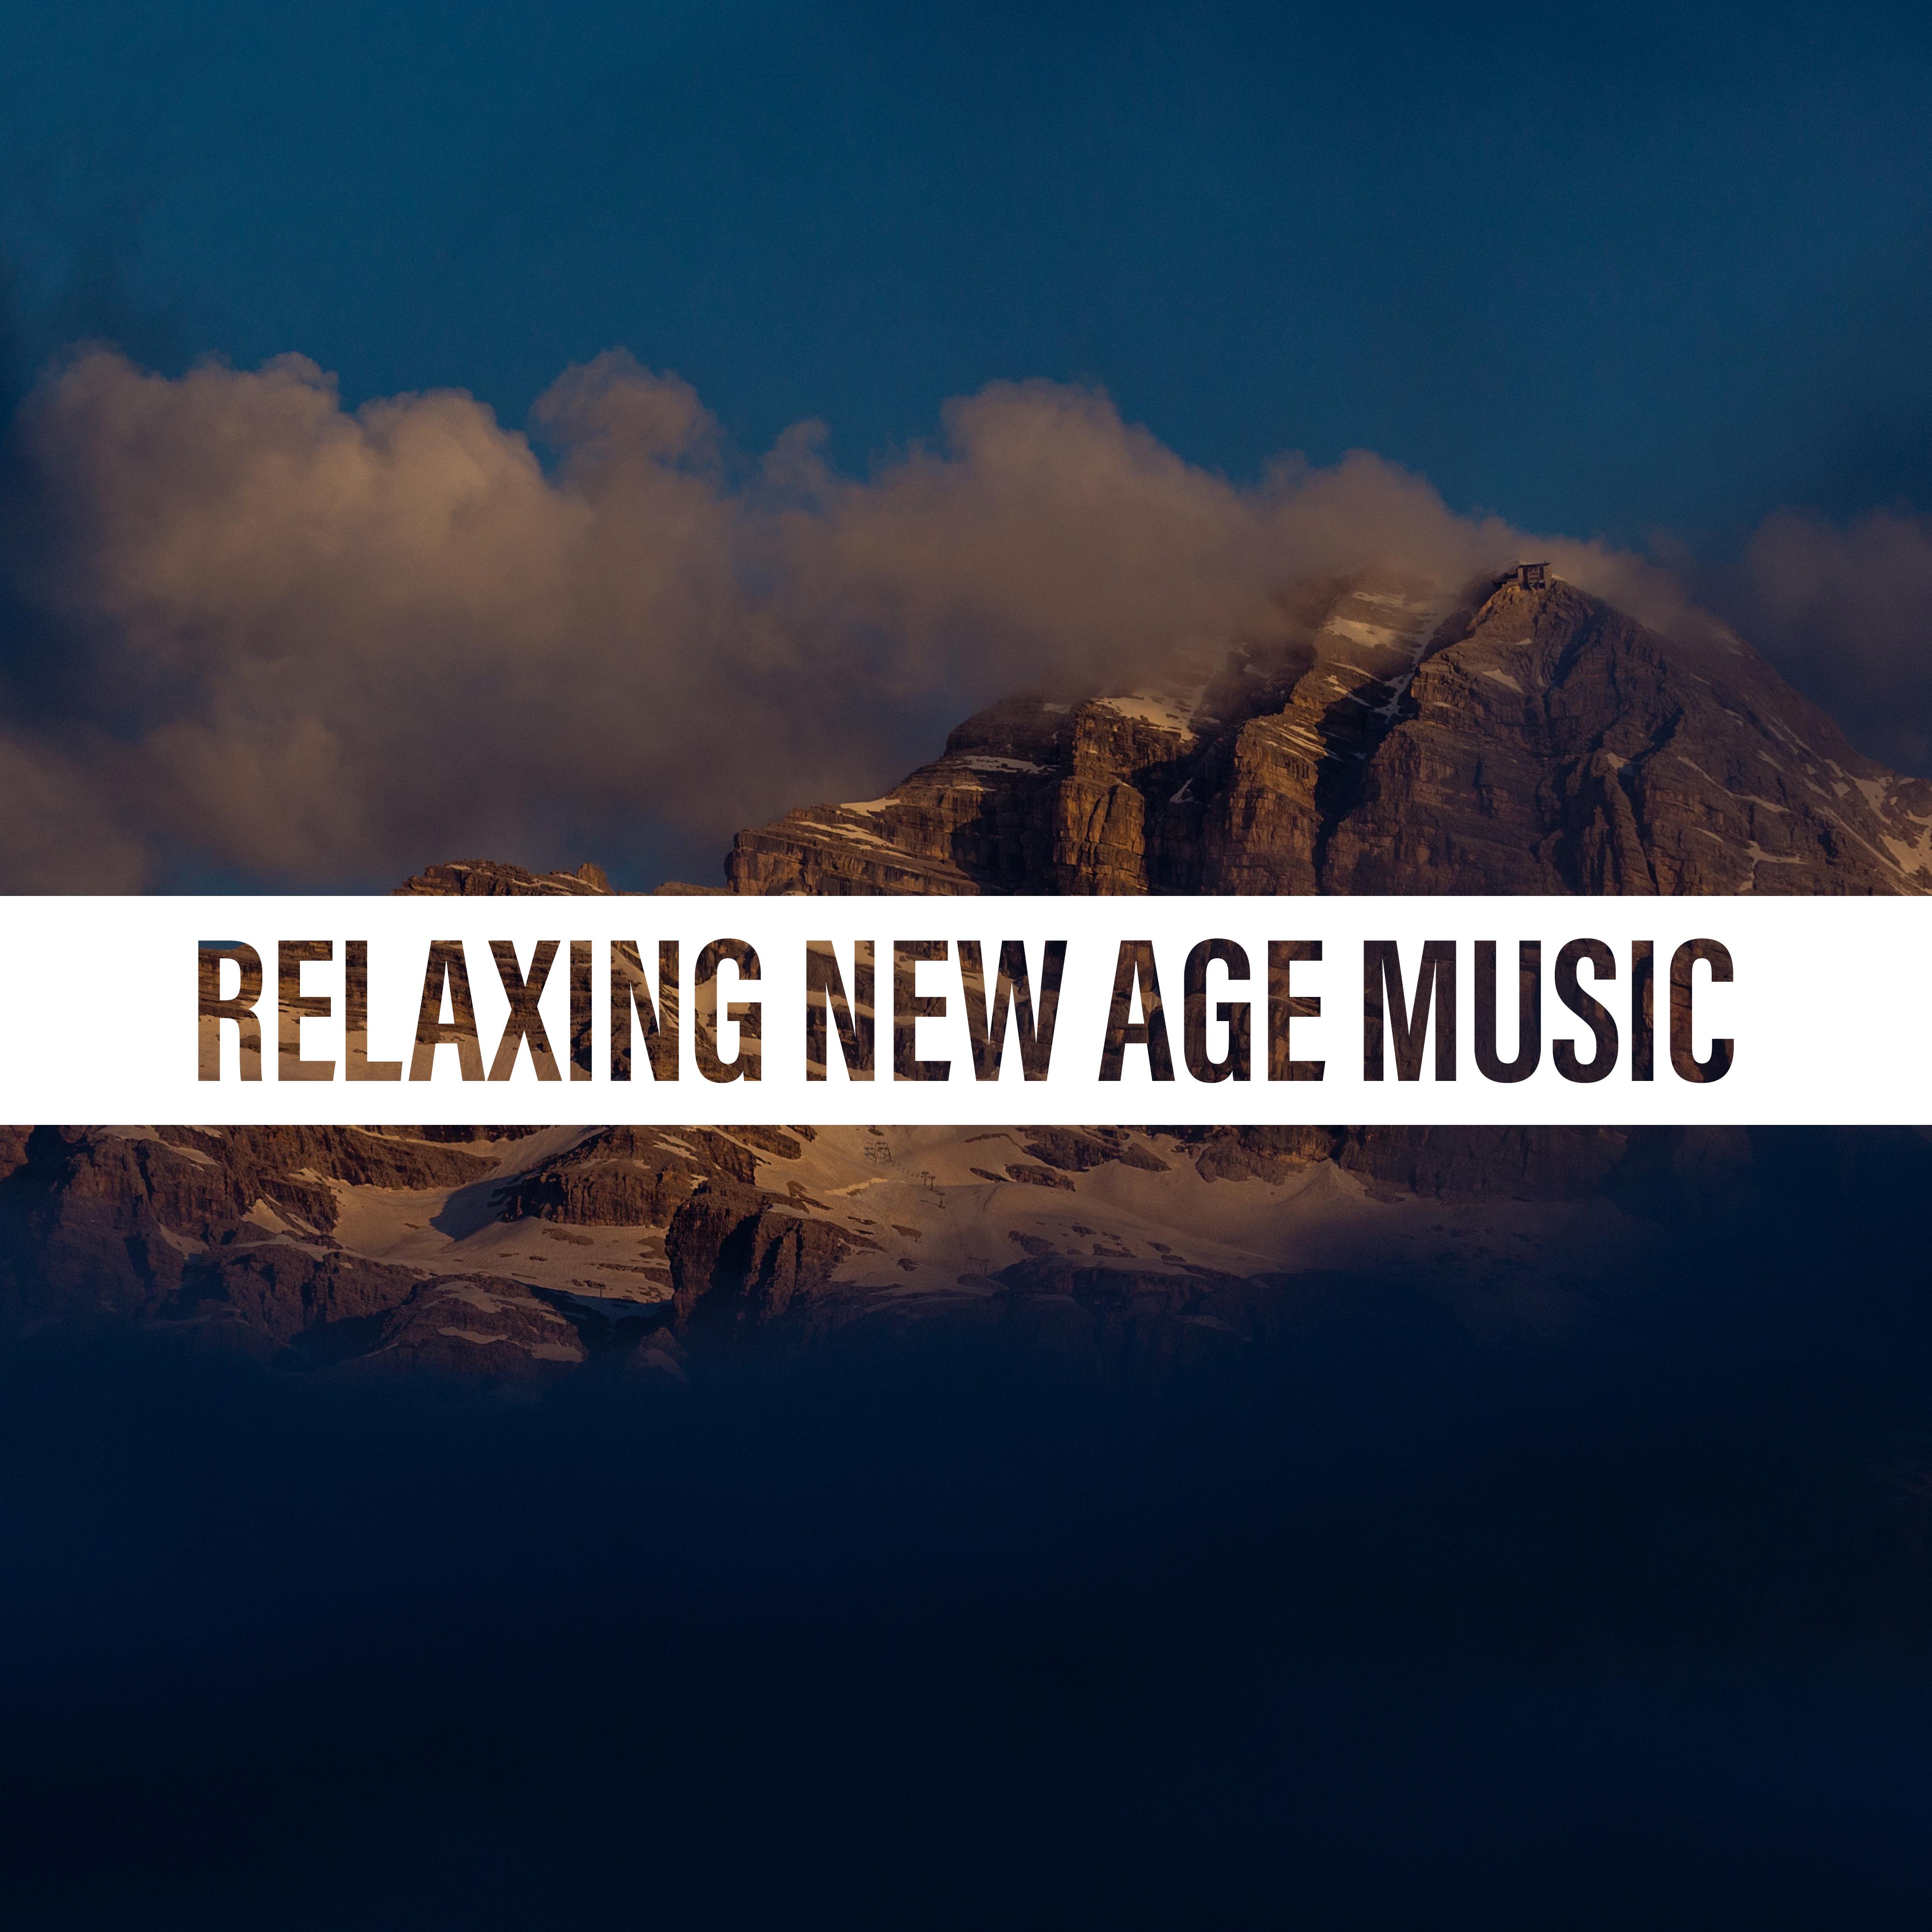 Relaxing New Age Music